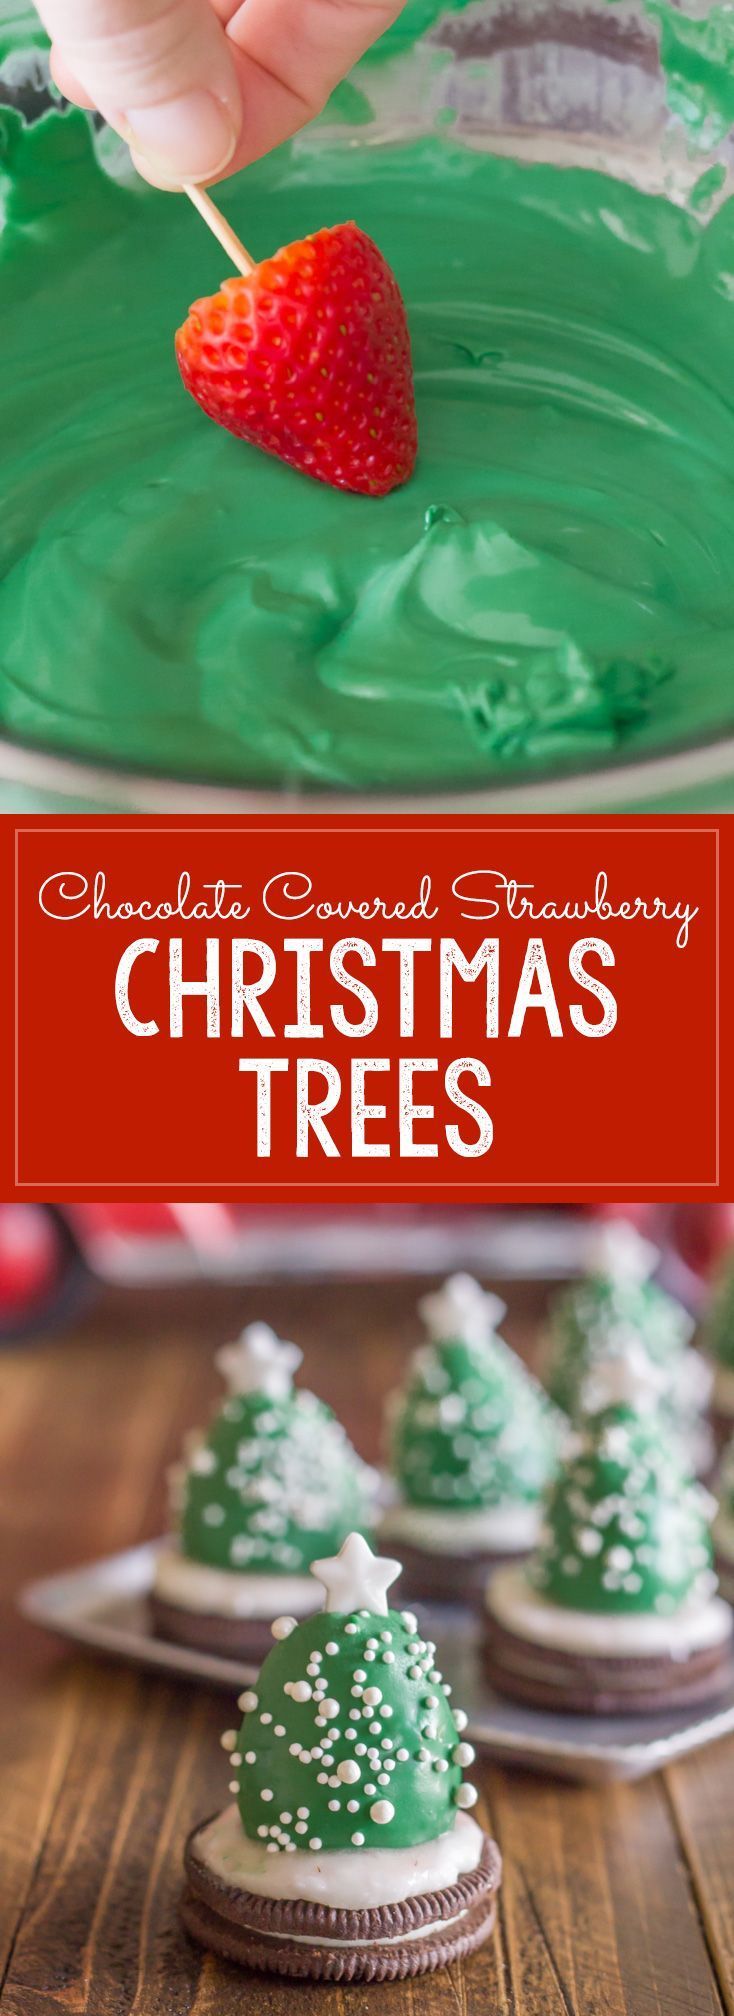 Chocolate Covered Strawberry Christmas Trees - Lovely Little Kitchen - Chocolate Covered Strawberry Christmas Trees - Lovely Little Kitchen -   24 xmas food easy diy ideas